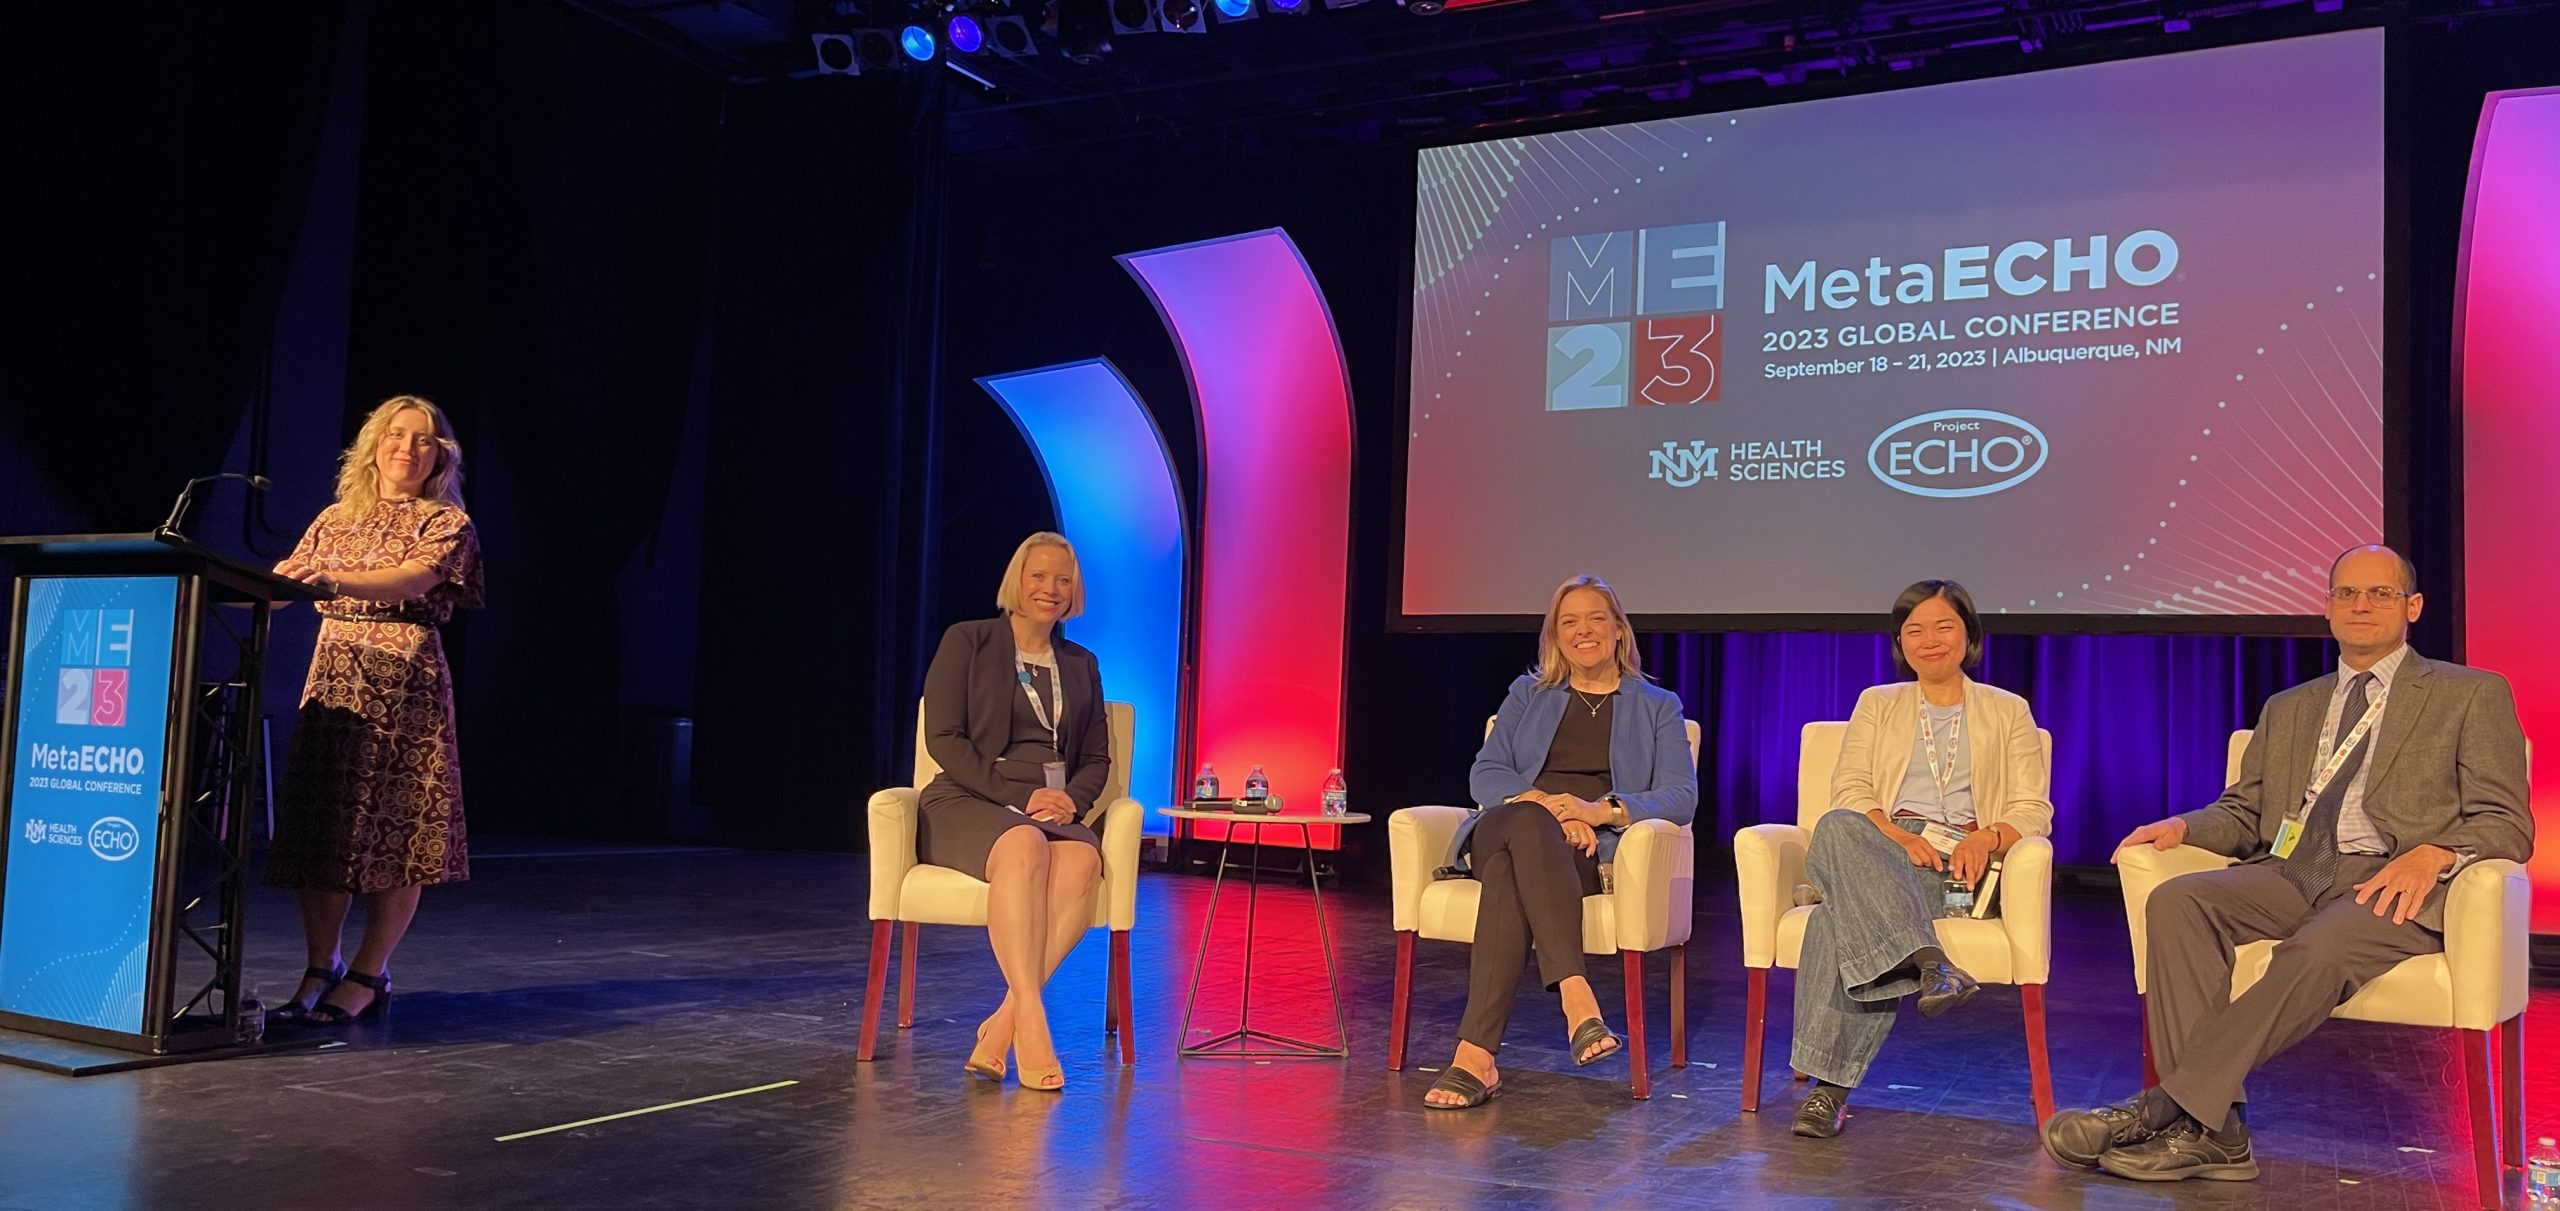 • Project ECHO’s Penn State team attends MetaECHO global conference